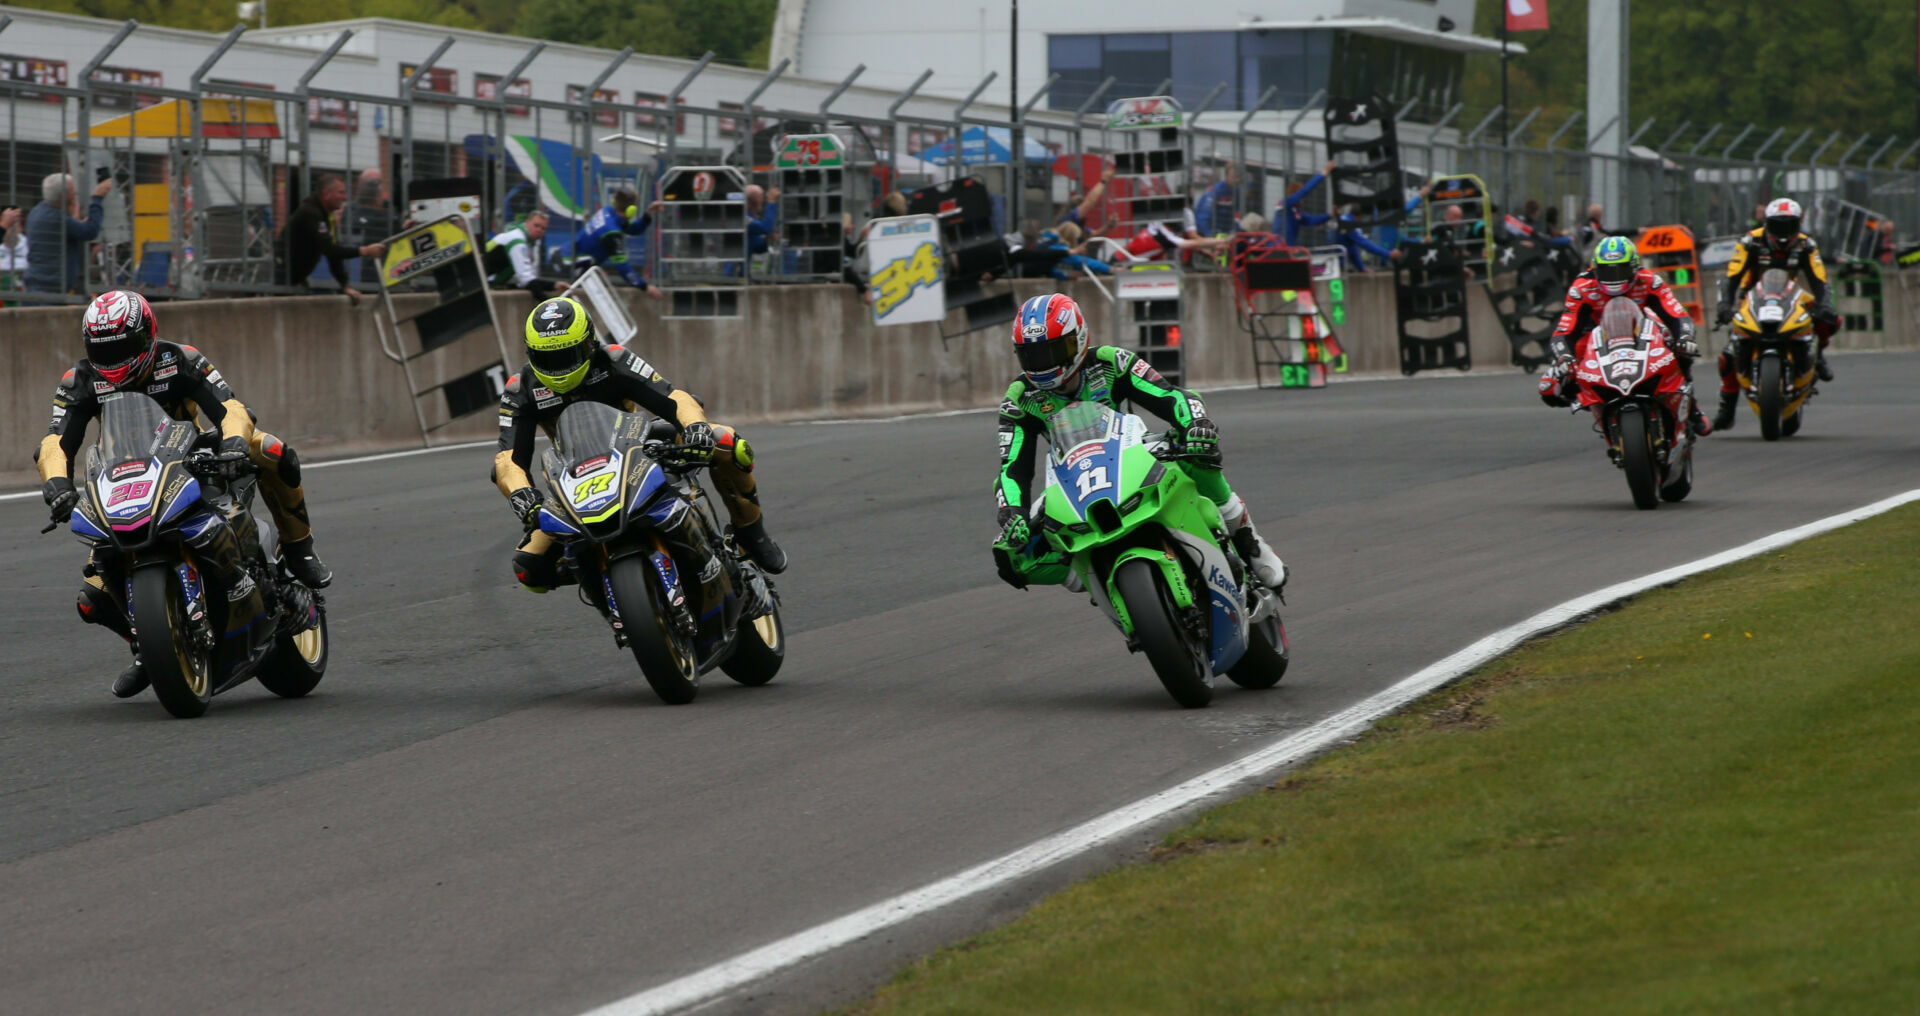 Bradley Ray (28), Kyle Ryde (77), and Rory Skinner (11) battle for the lead at Oulton Park. Photo courtesy MSVR.